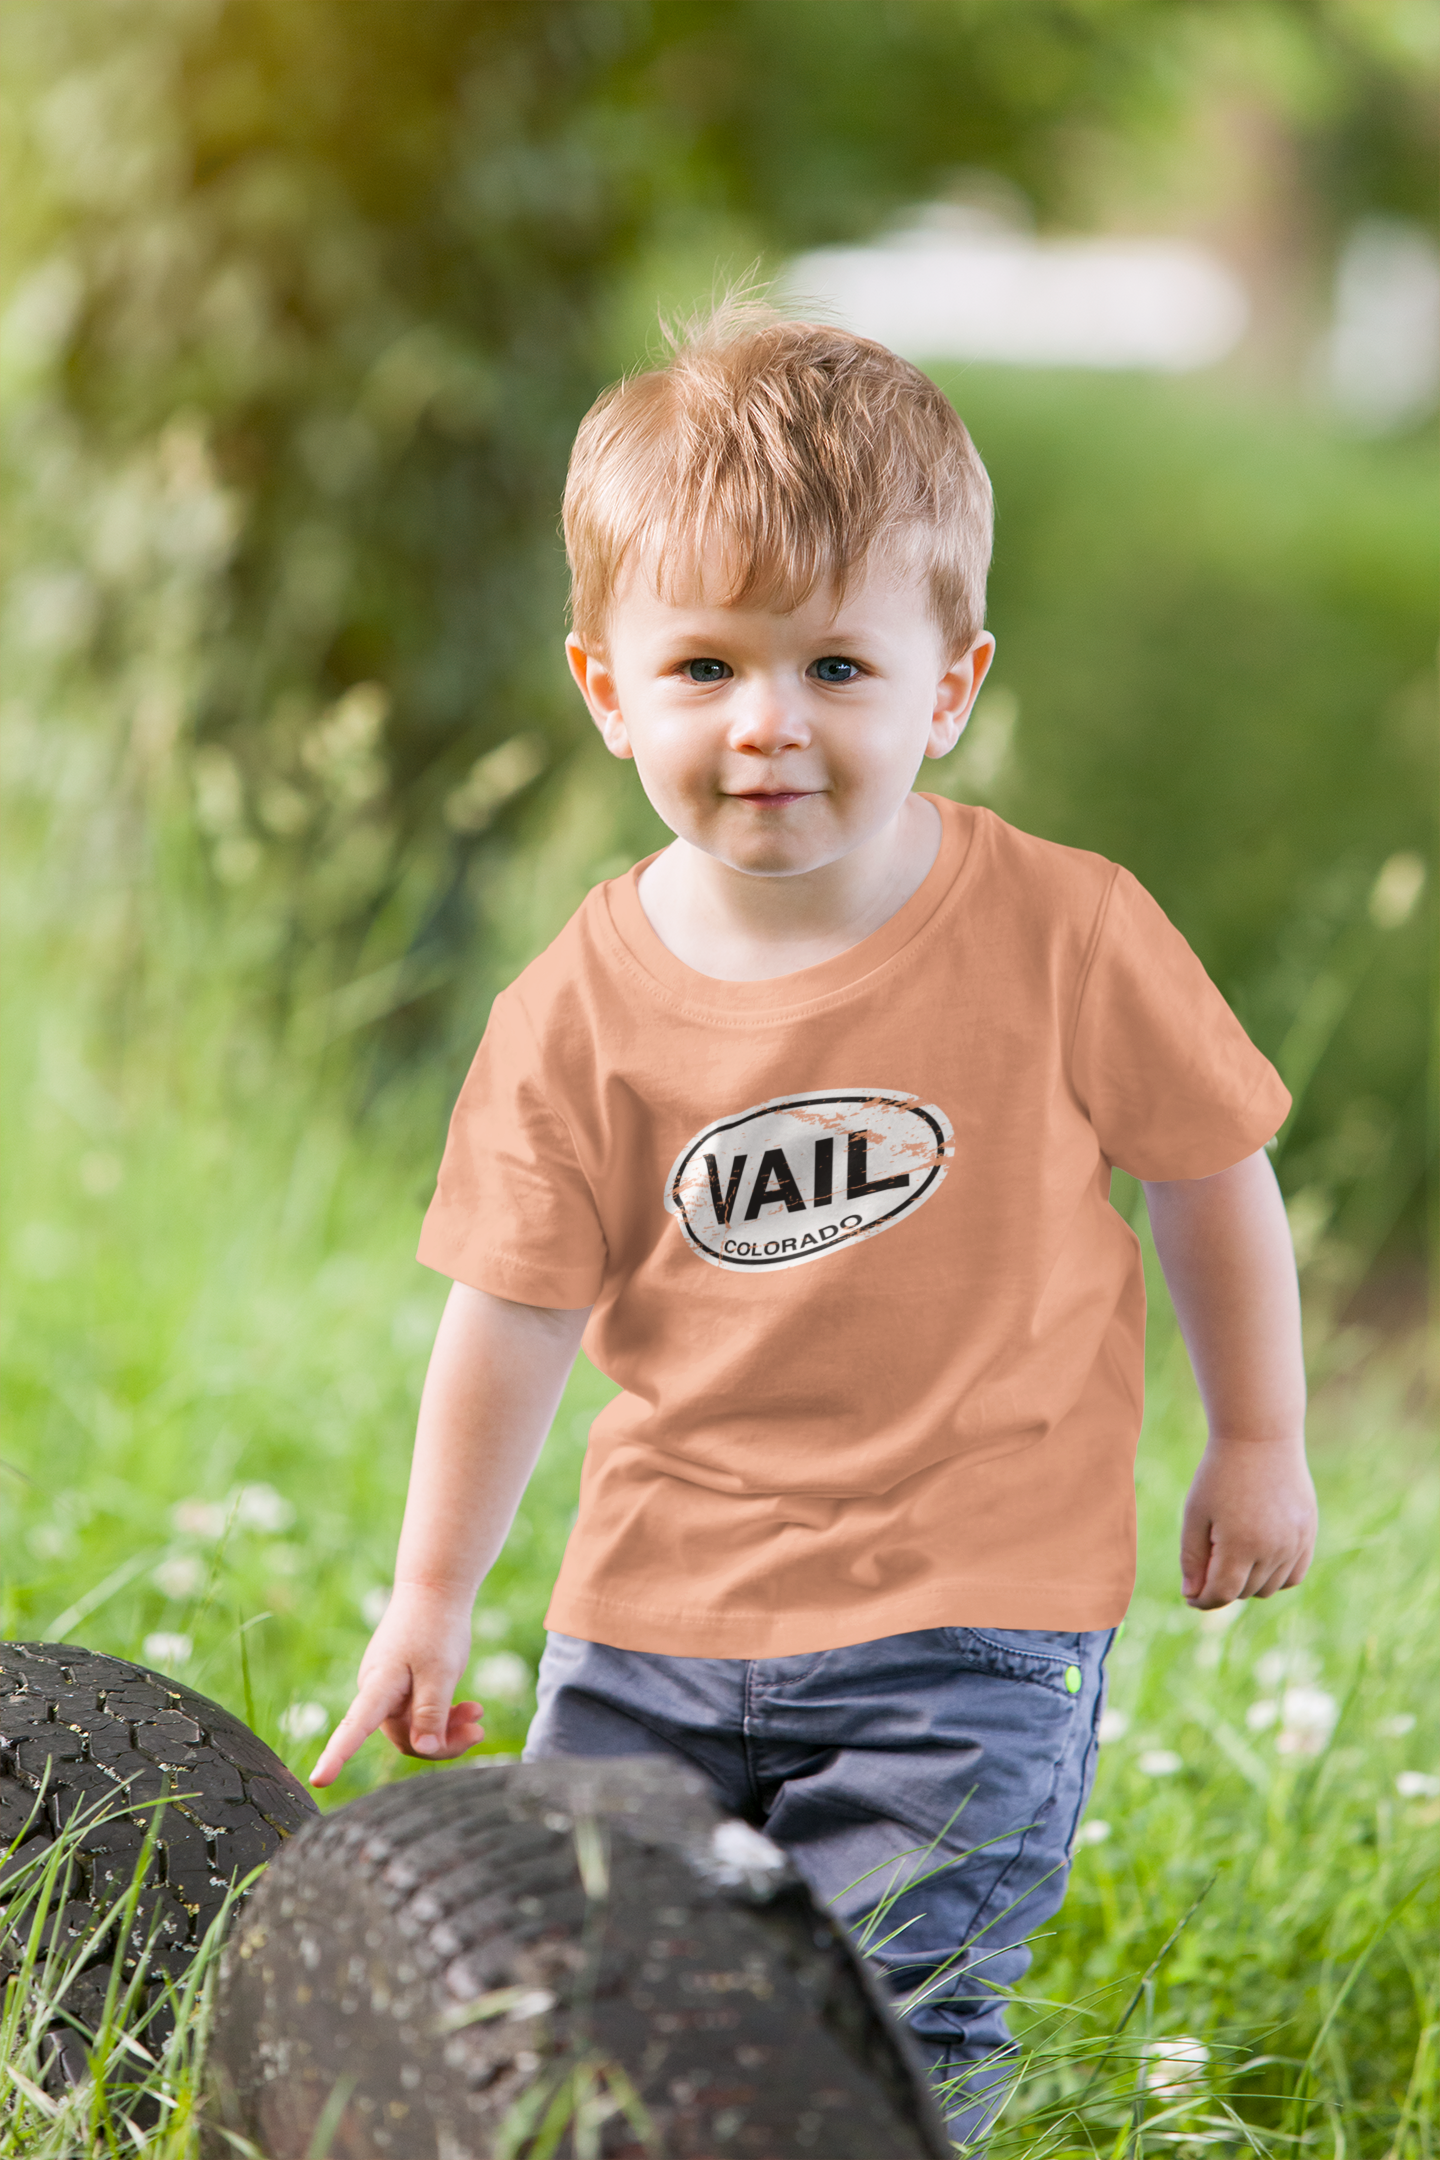 Vail, CO Classic Youth T-Shirt Gift Souvenir - My Destination Location